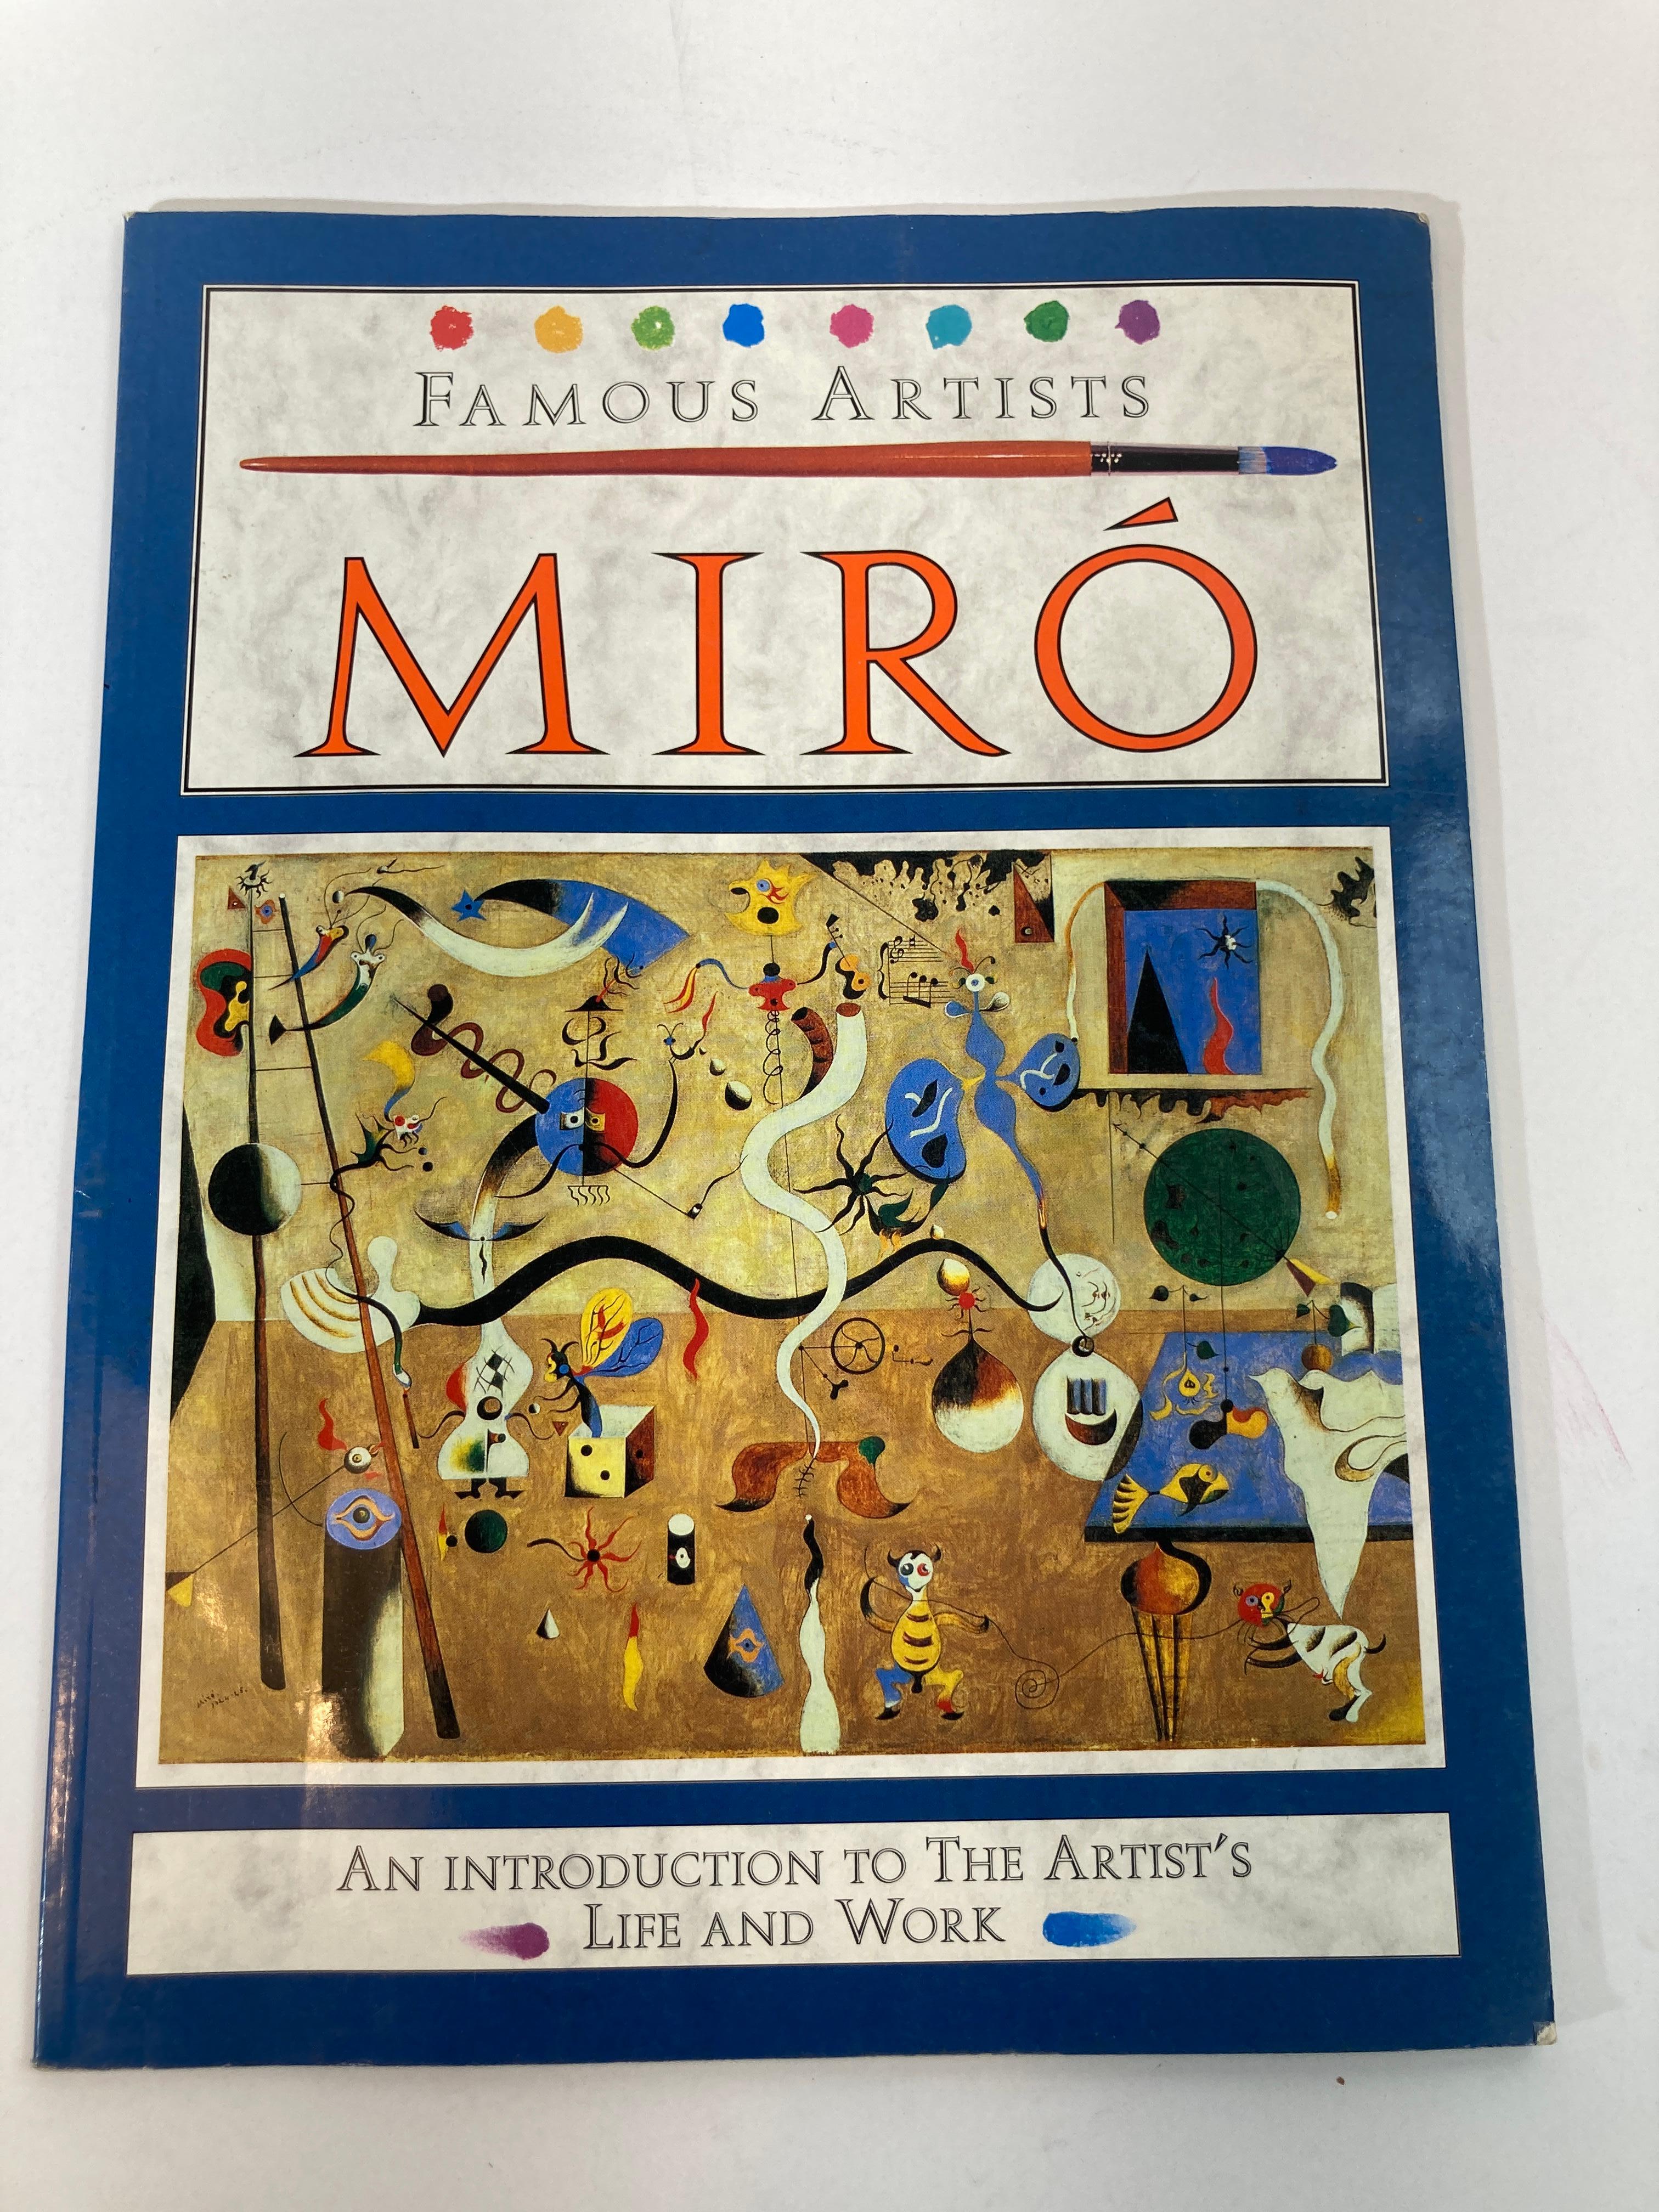 Miro (Famous Artists)
Explores Miro's life and development as an artist, his entry into surrealism, and his versatility in abstract expression. Includes a brief history of art.
Format: Paperback
Language: English
Release Date: September